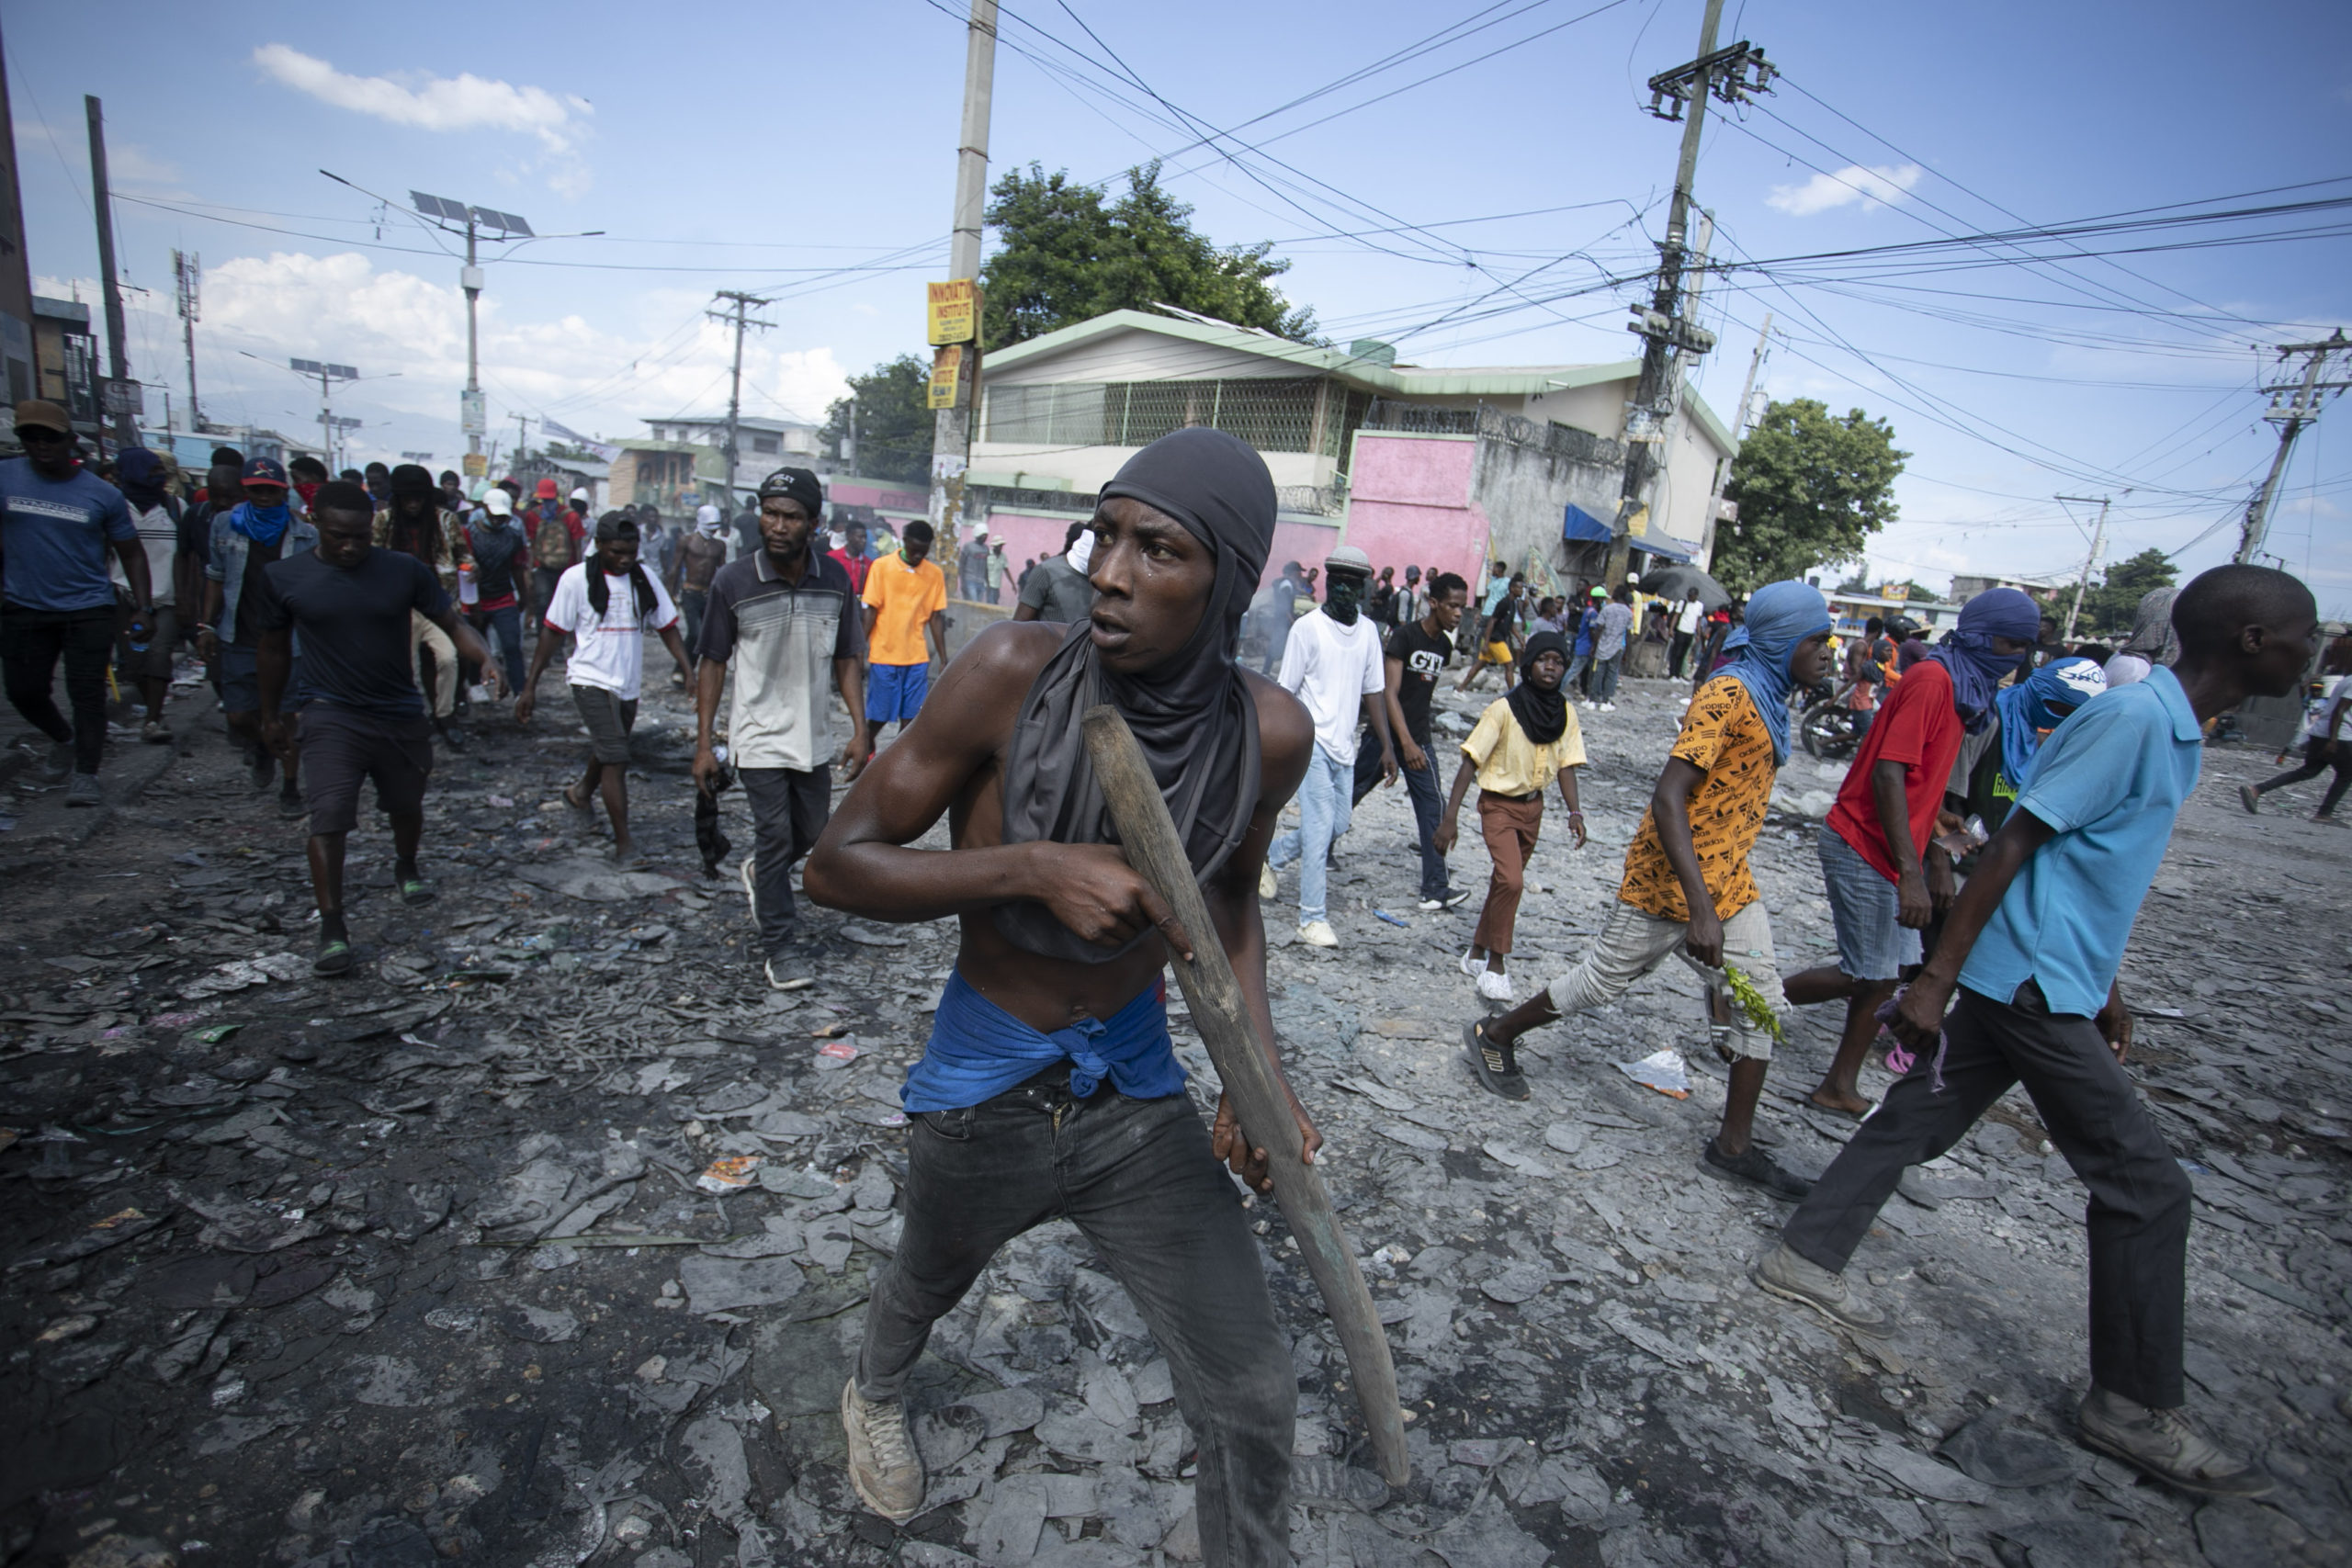 Protesters move through the streets in Port-au-Prince, Haiti, demanding the resignation of Prime Minister Ariel Henry on Monday.